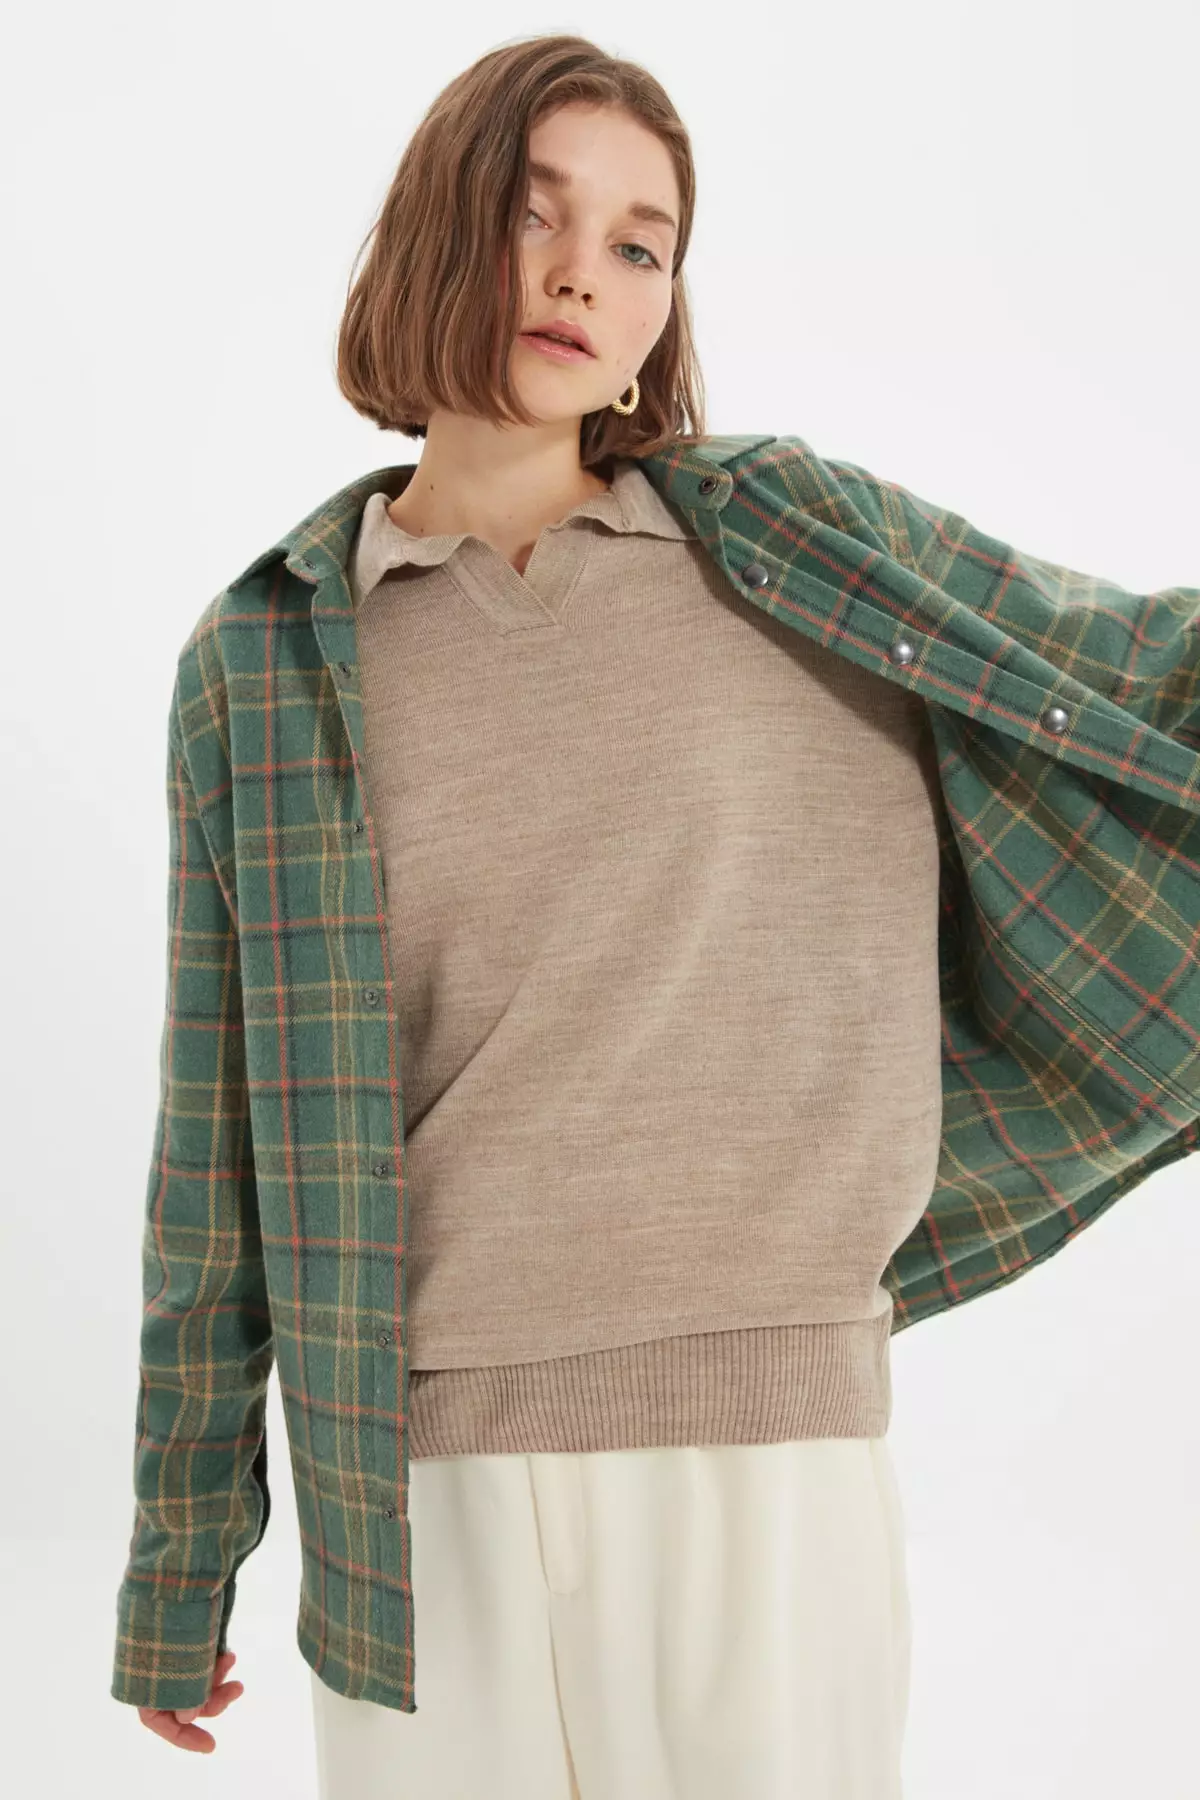 Green Unisex Oversize Plaid Lumberjack Shirt With Snap-In